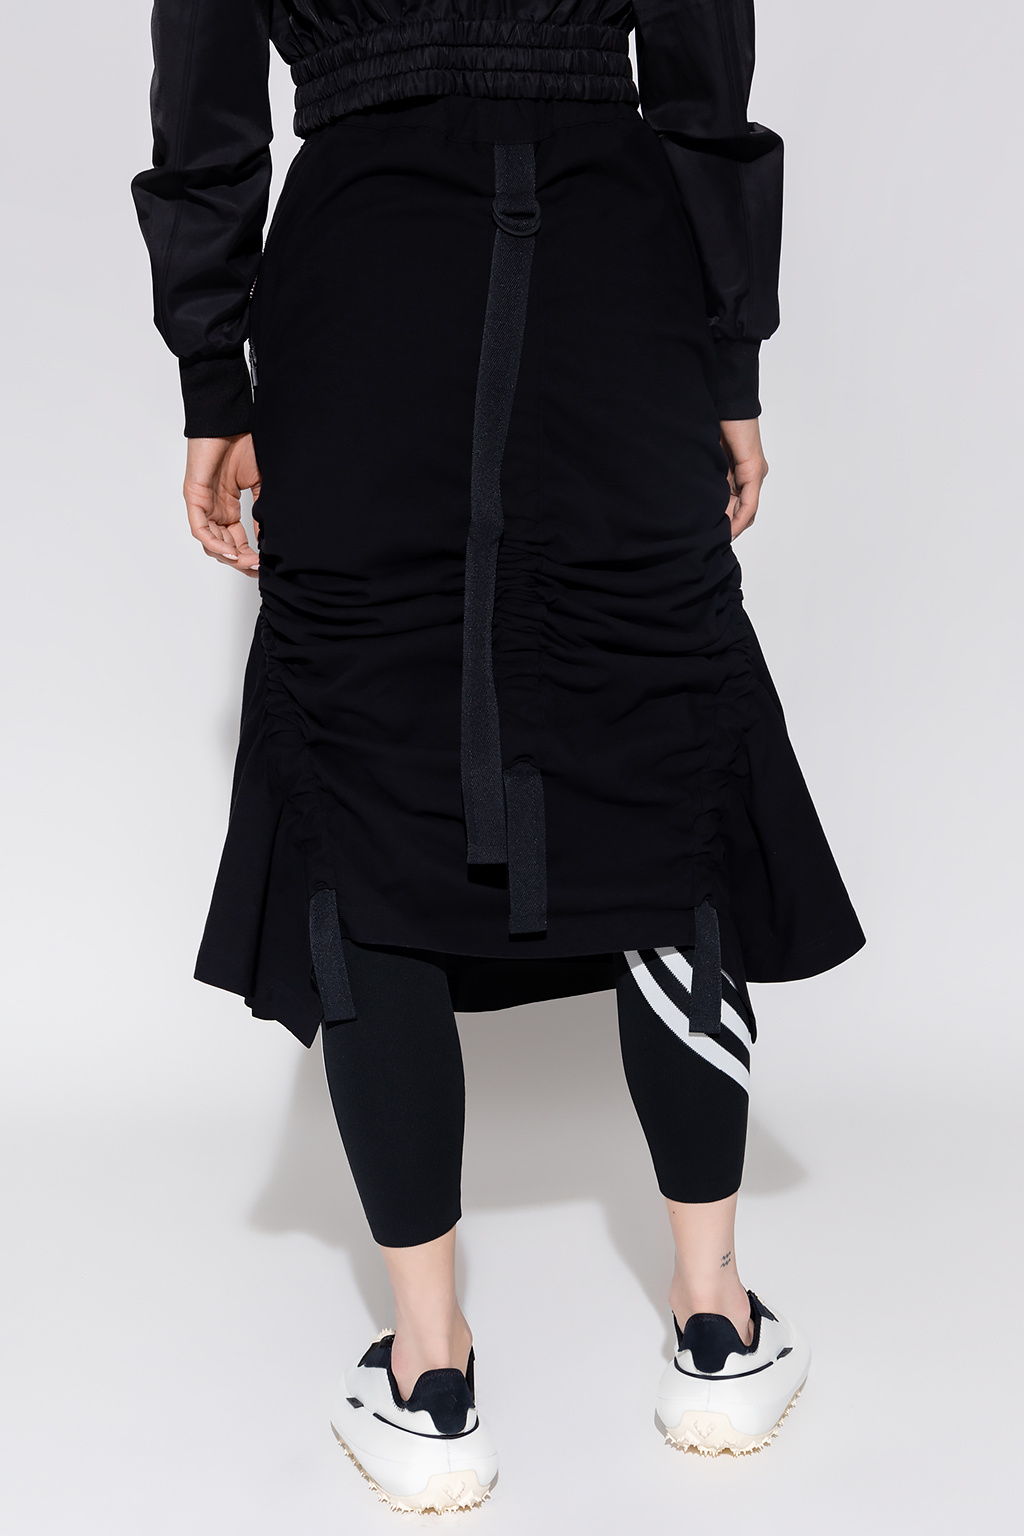 See a unique collaboration with Lacoste which blurs the lines between fashion and sport Asymmetrical skirt